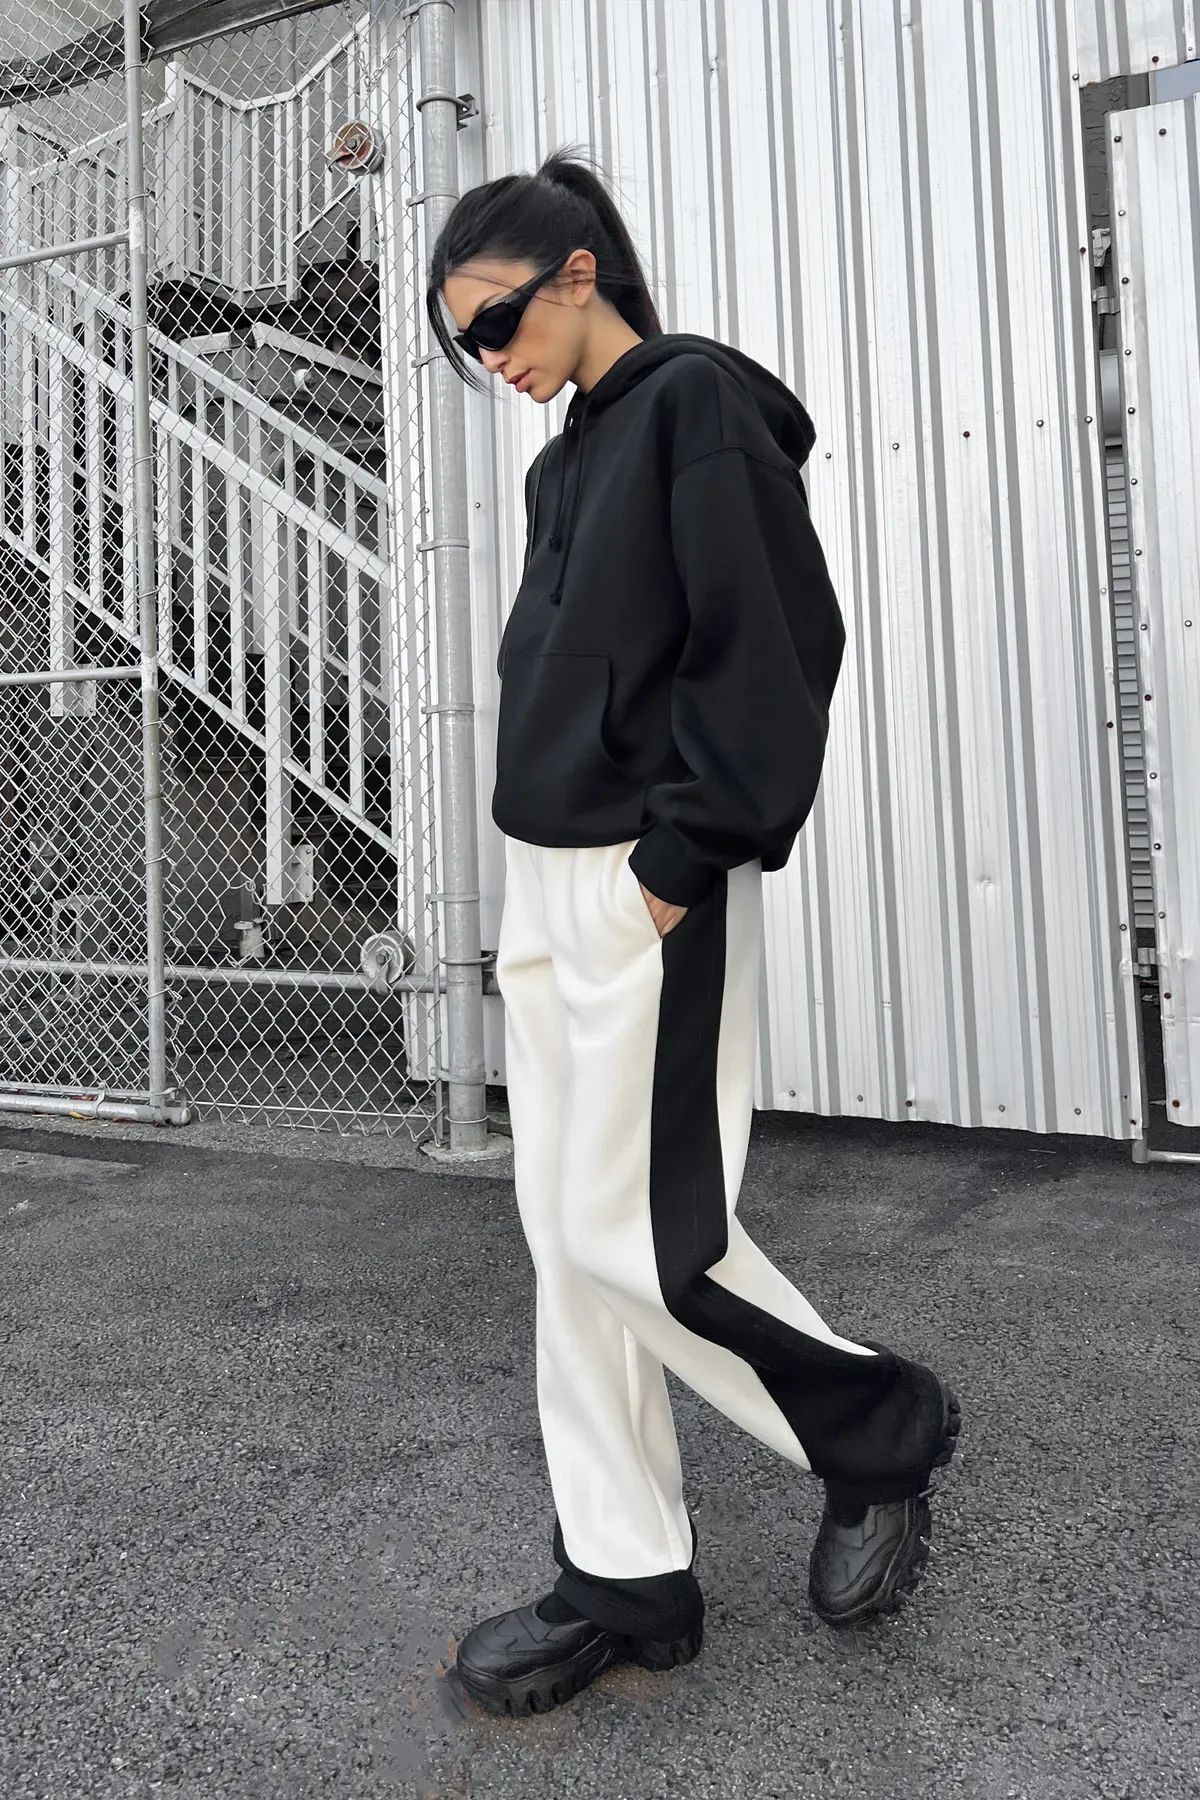 SWEATPANT WITH SEAM DETAIL | OAK + FORT